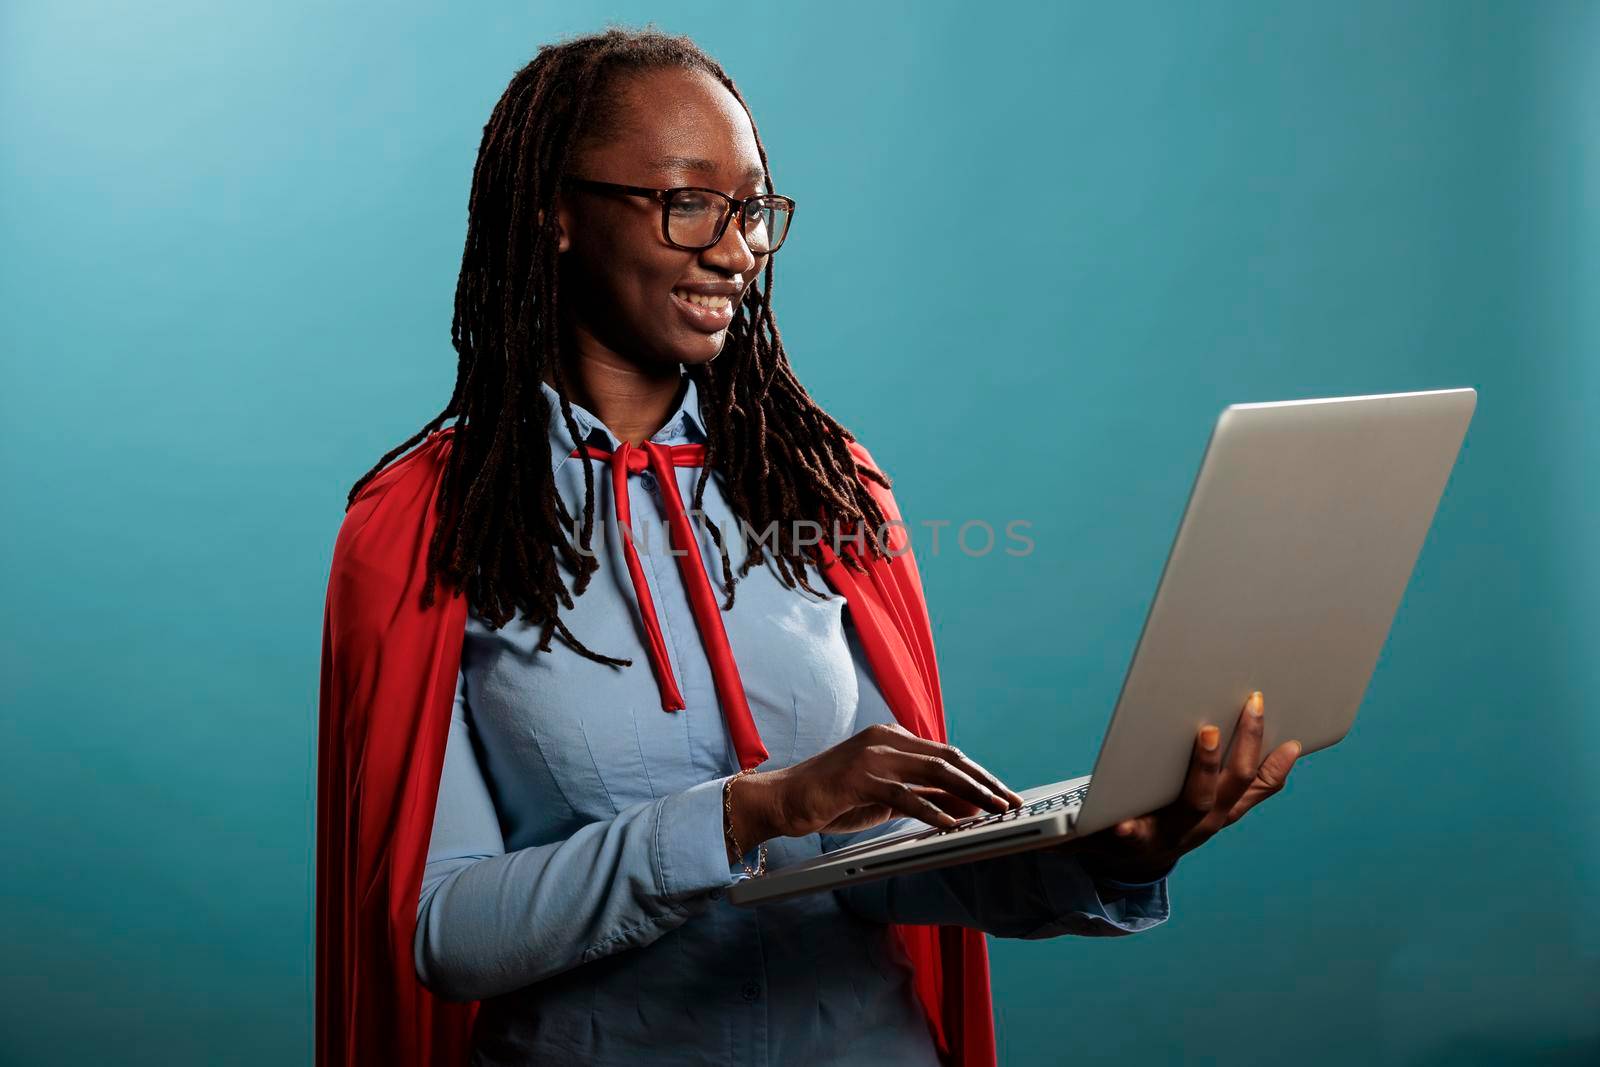 Portrait of confident and positive african american justice defender browsing internet on modern laptop. Happy joyful superhero woman wearing mighty hero red cloak while standing on blue background.